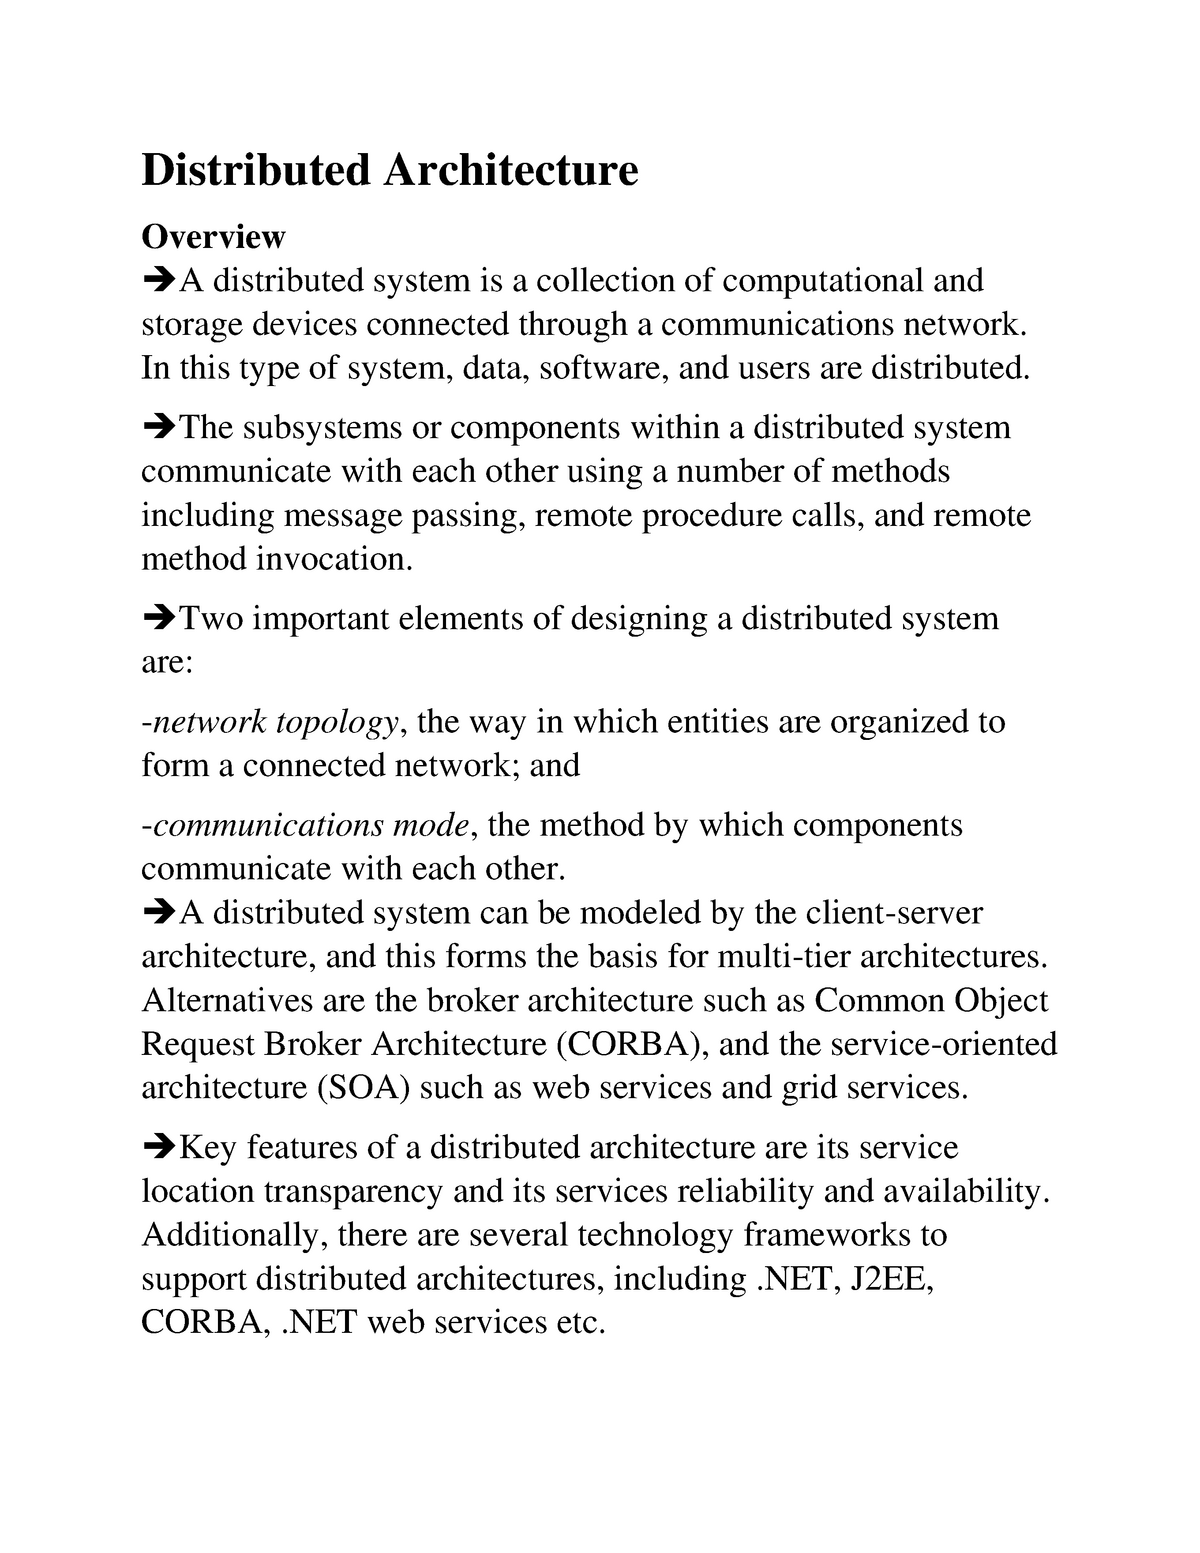 research papers related to distributed systems